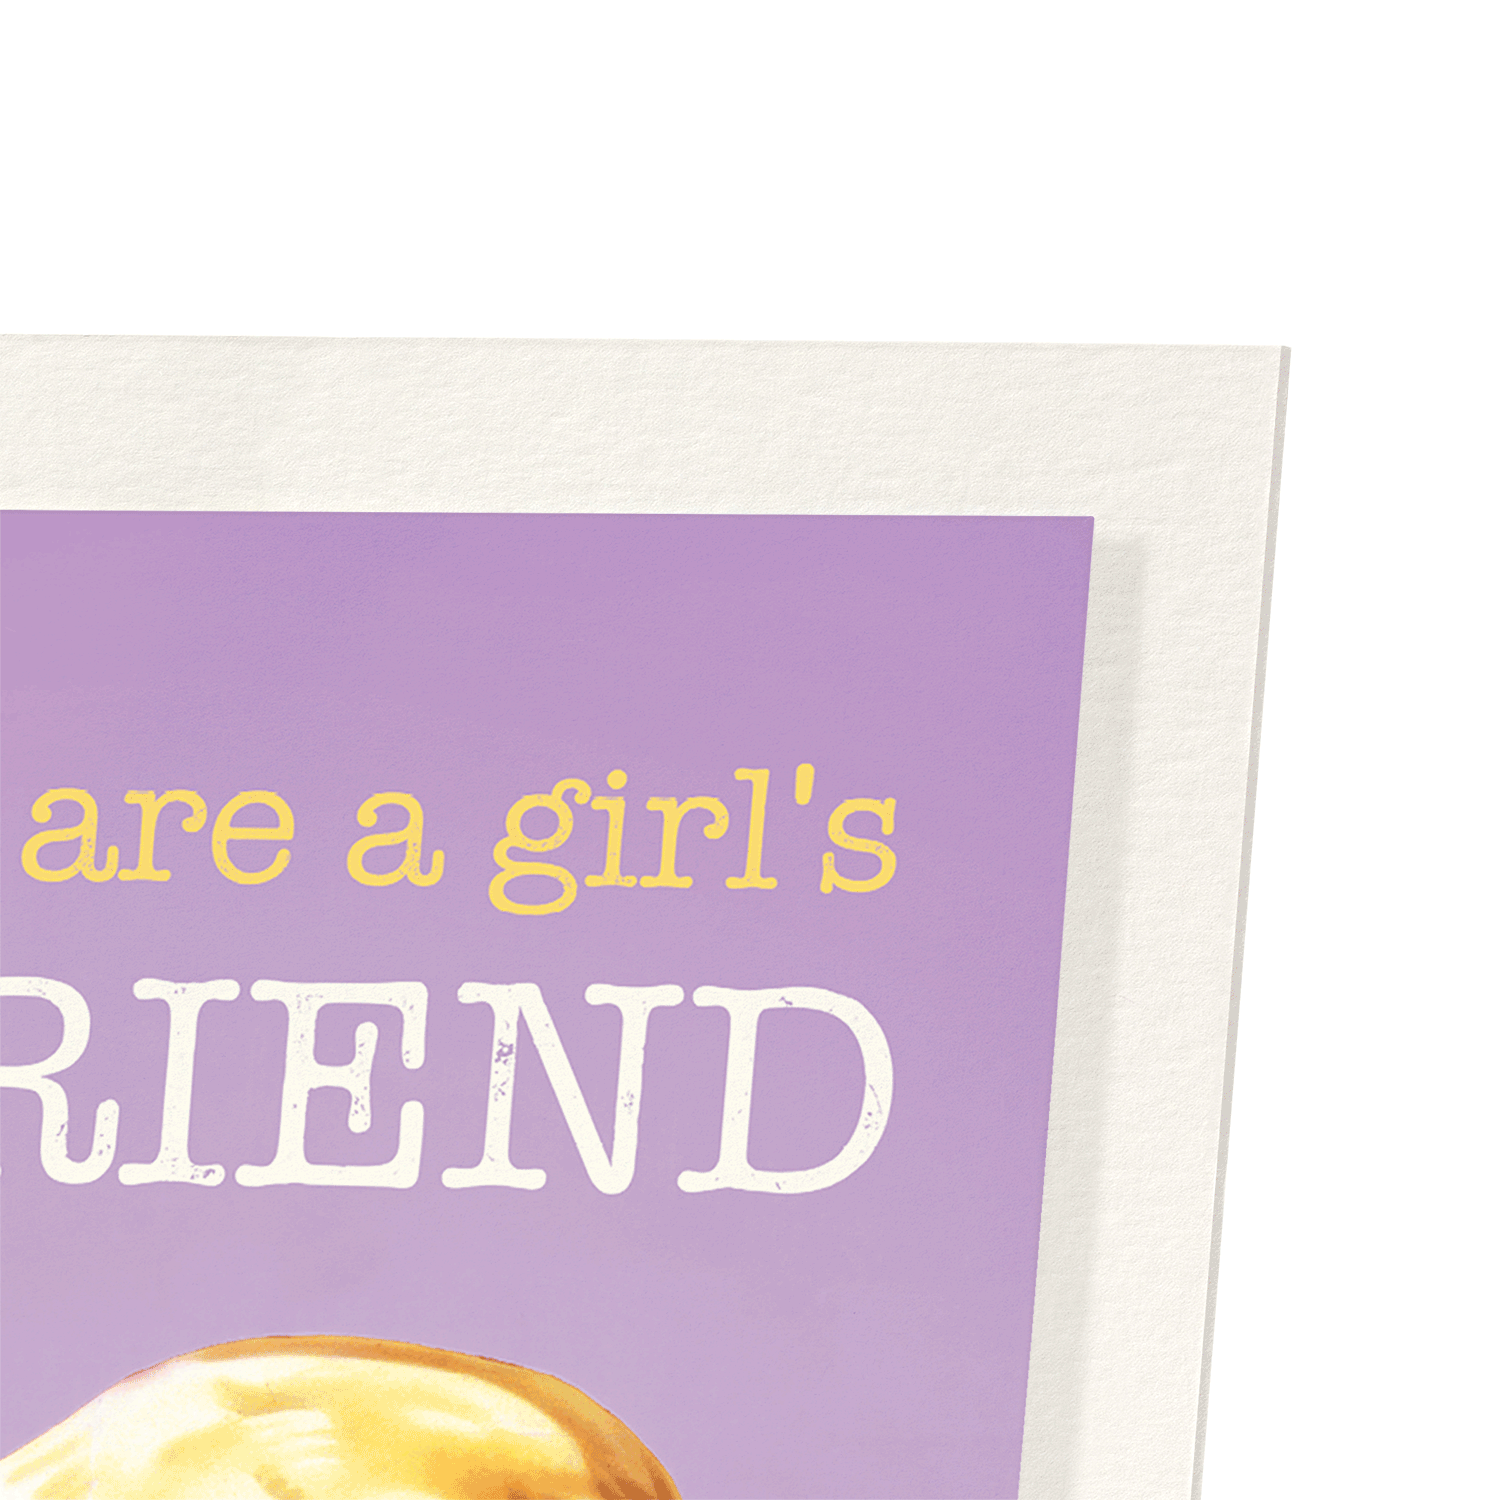 BOOKS ARE A GIRL’S BEST FRIEND: Vintage Art Print